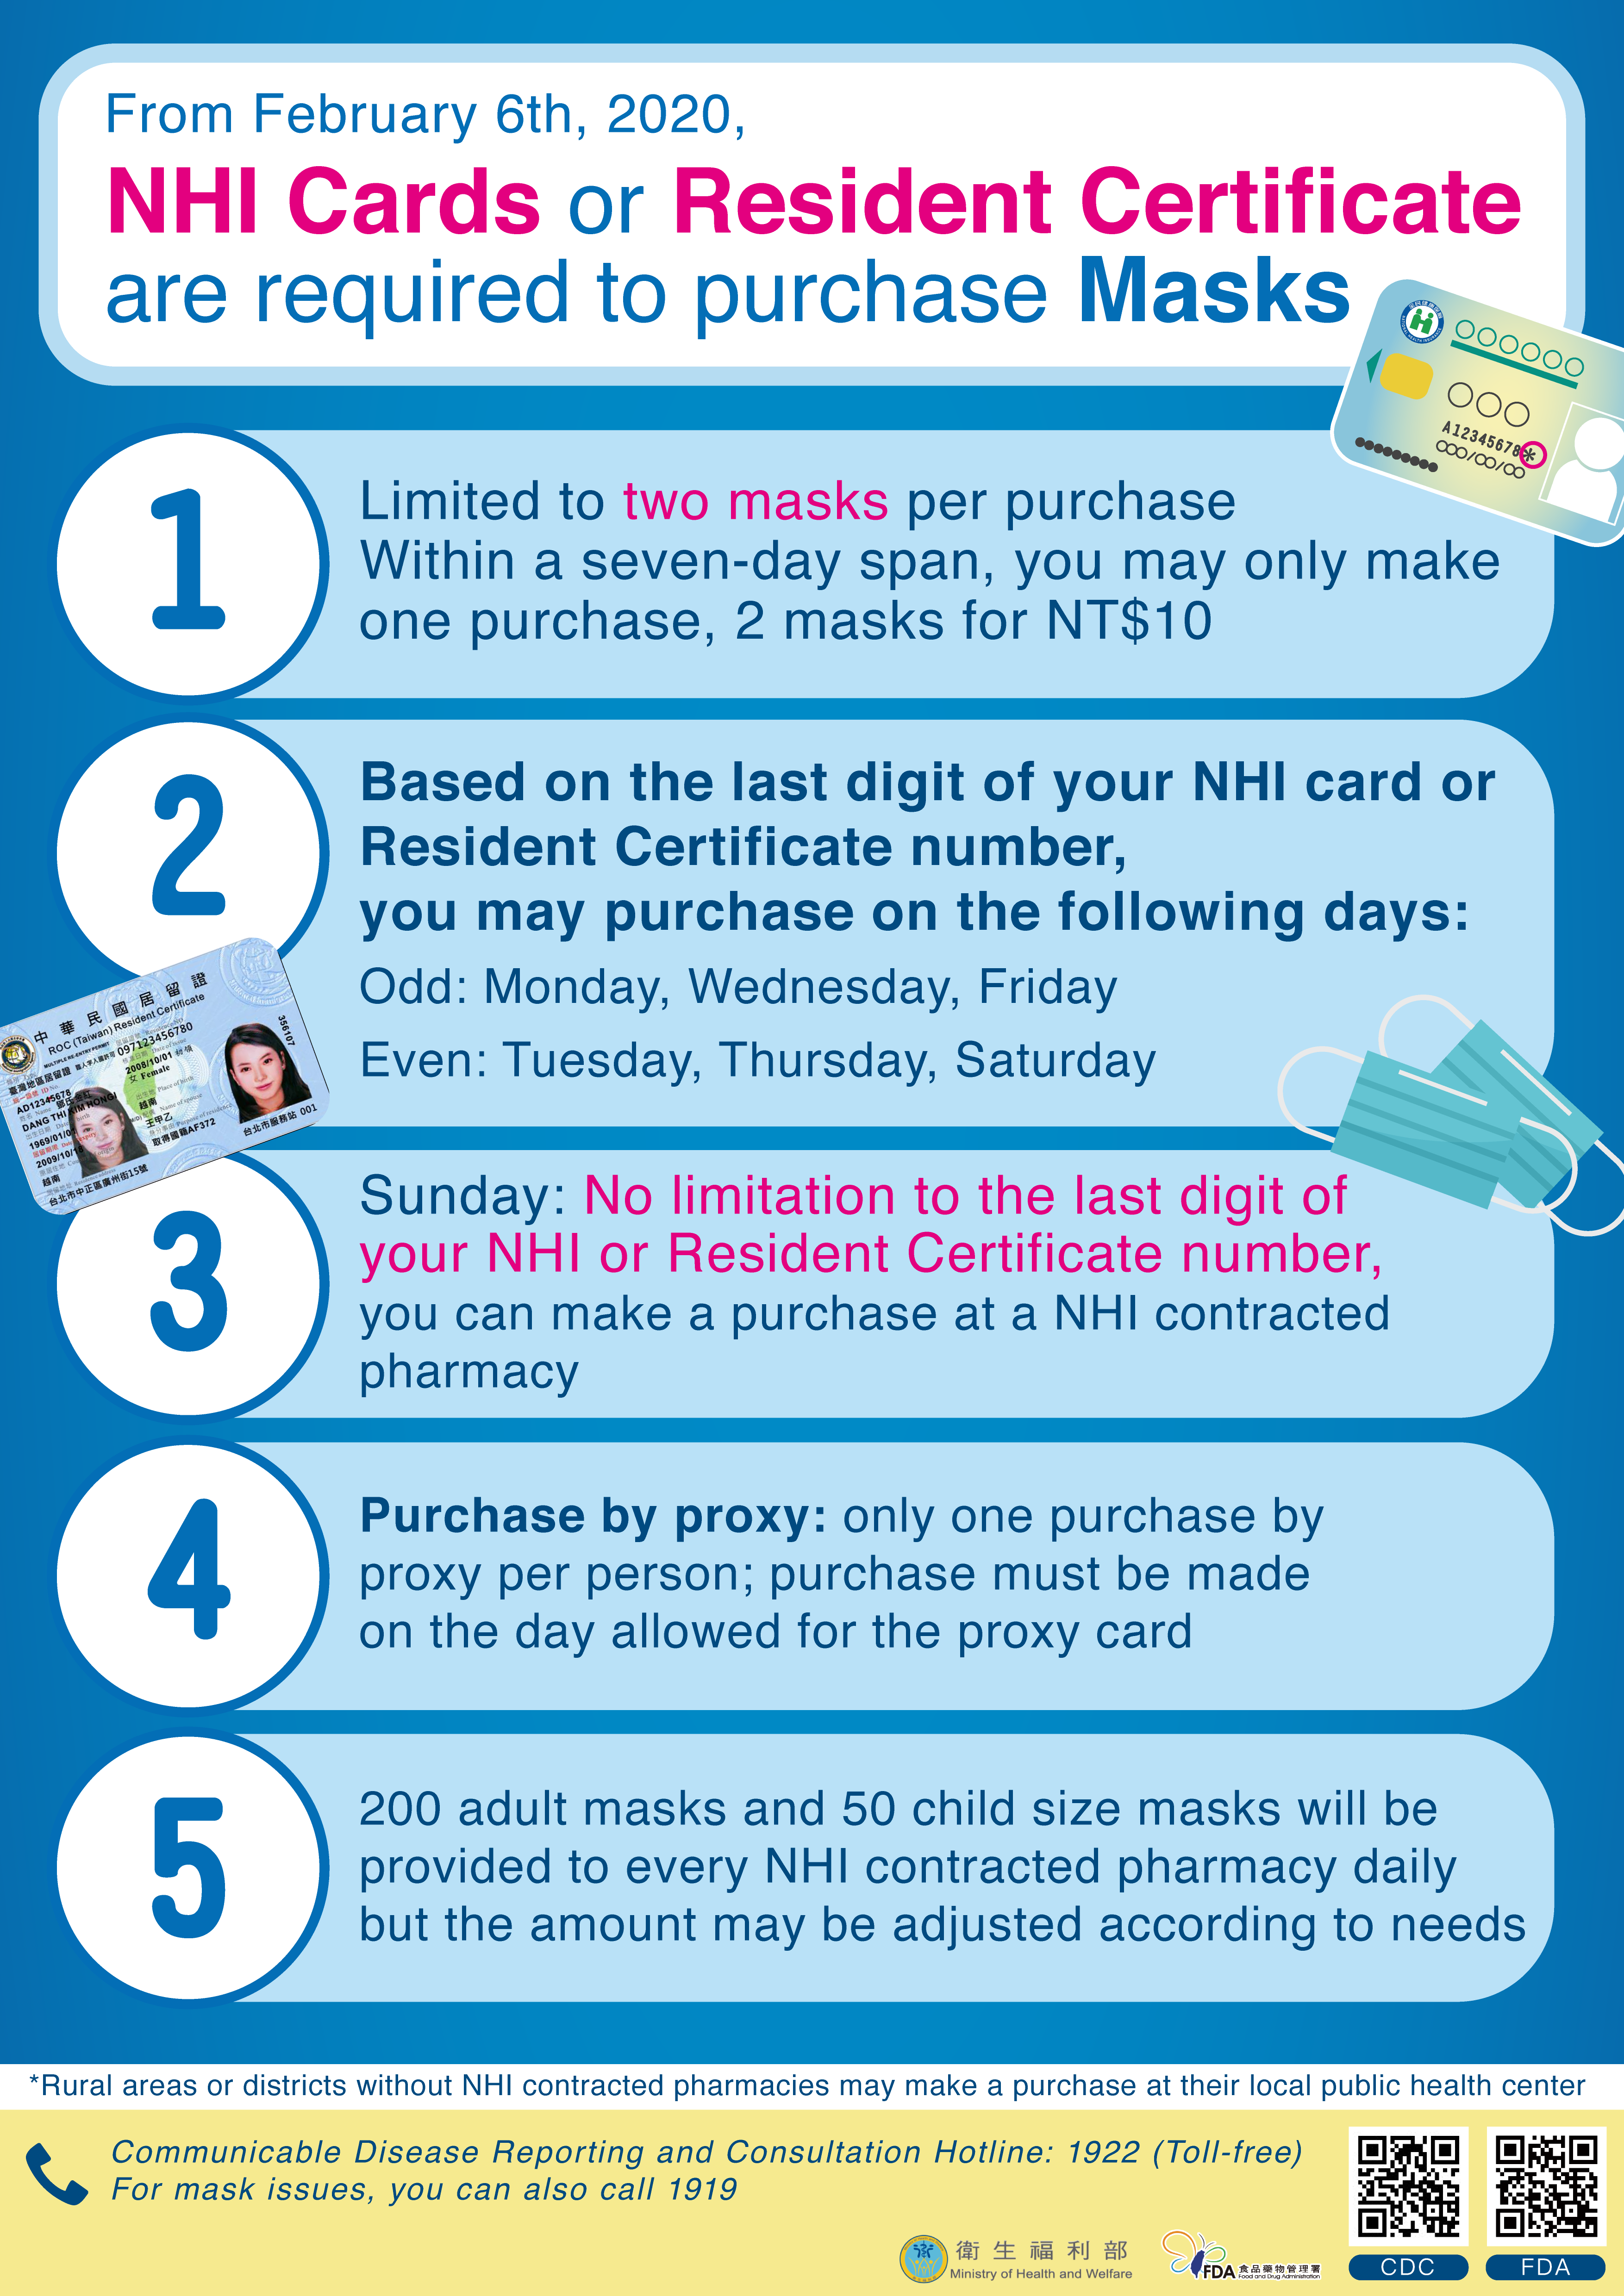 From Feb. 6th, 2020, NHI cards or Resident Certificate are required to purchase Masks.